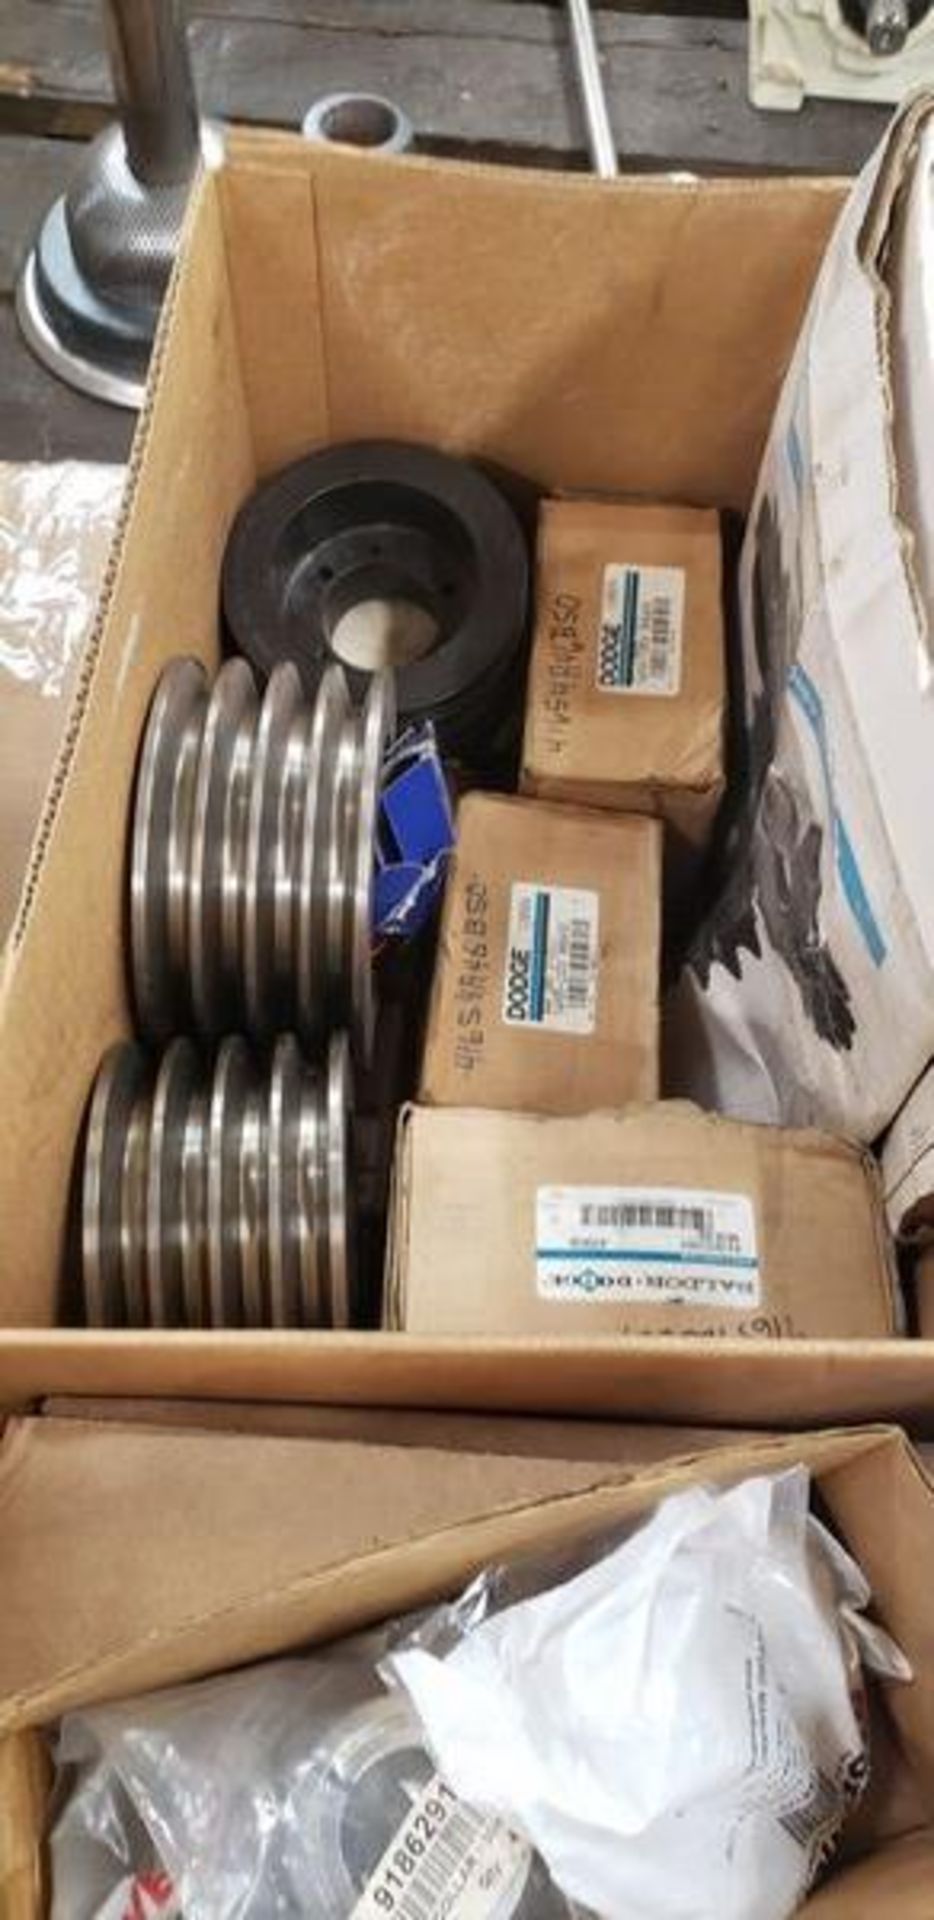 SKID OF BEARINGS, CHAIN PULLEYS AND MISC - Image 10 of 13